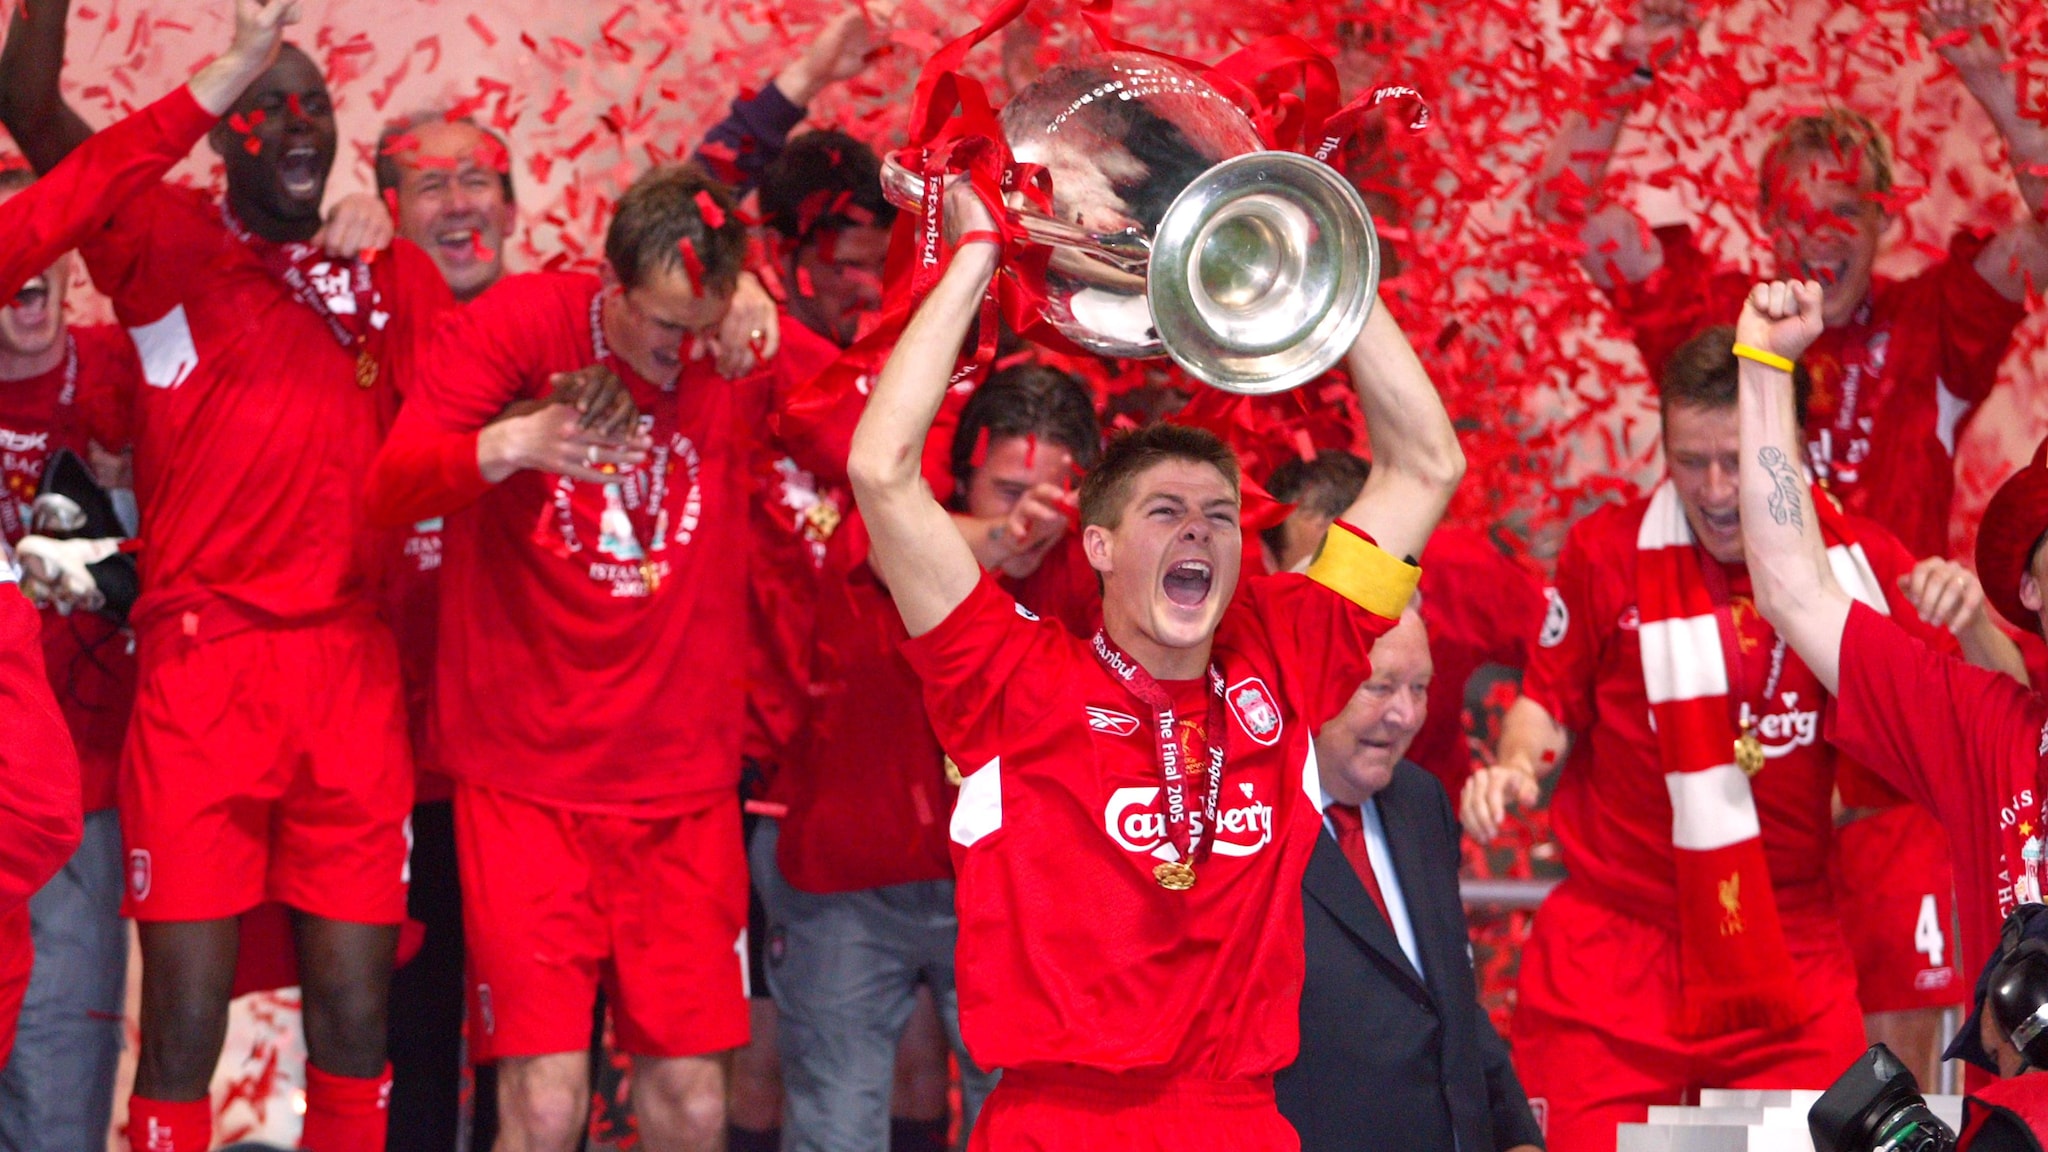 of Istanbul: 2005 Champions League final in the words of Liverpool's unlikely heroes | UEFA Champions League | UEFA.com